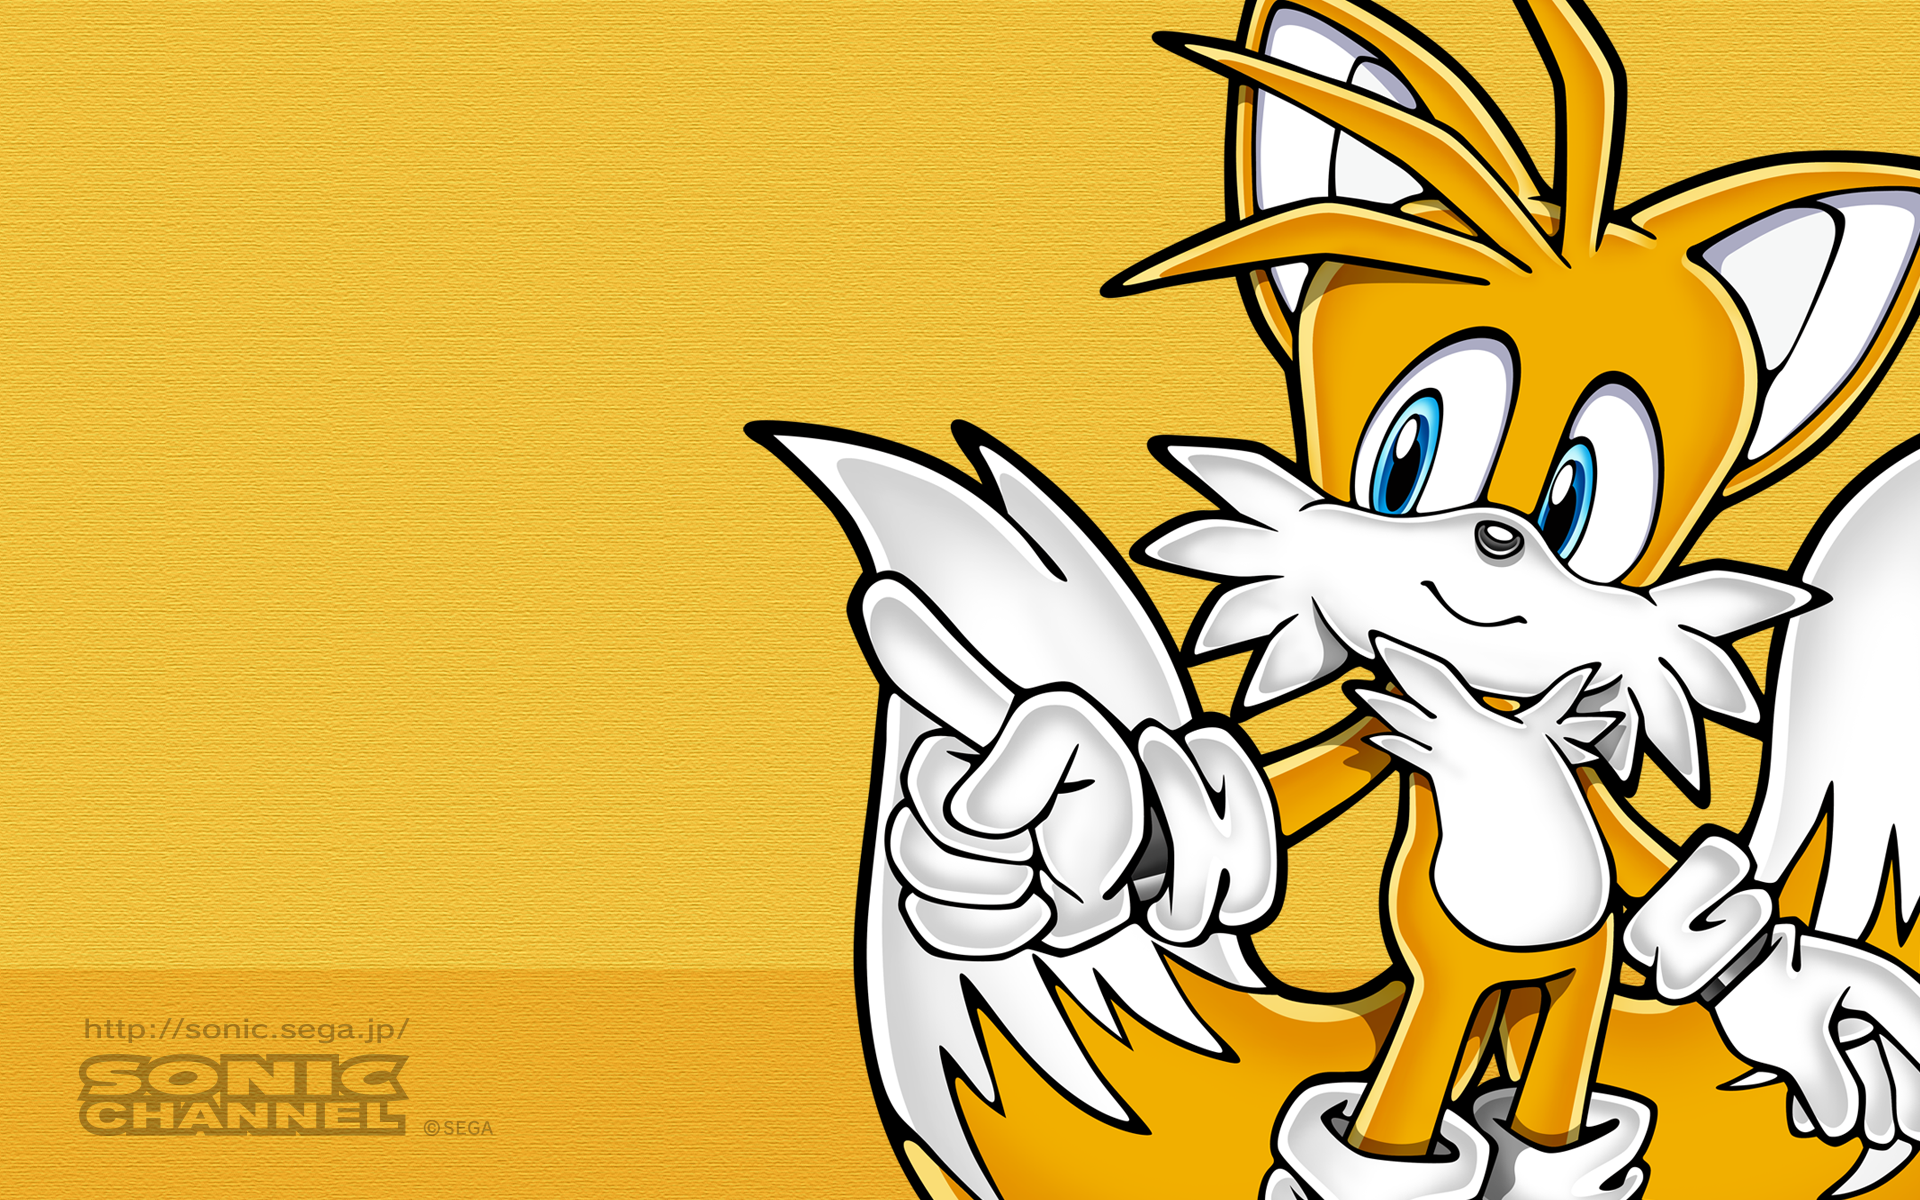 General 1920x1200 Sonic the Hedgehog video games Sega yellow background Tails (character) fox video game characters PC gaming